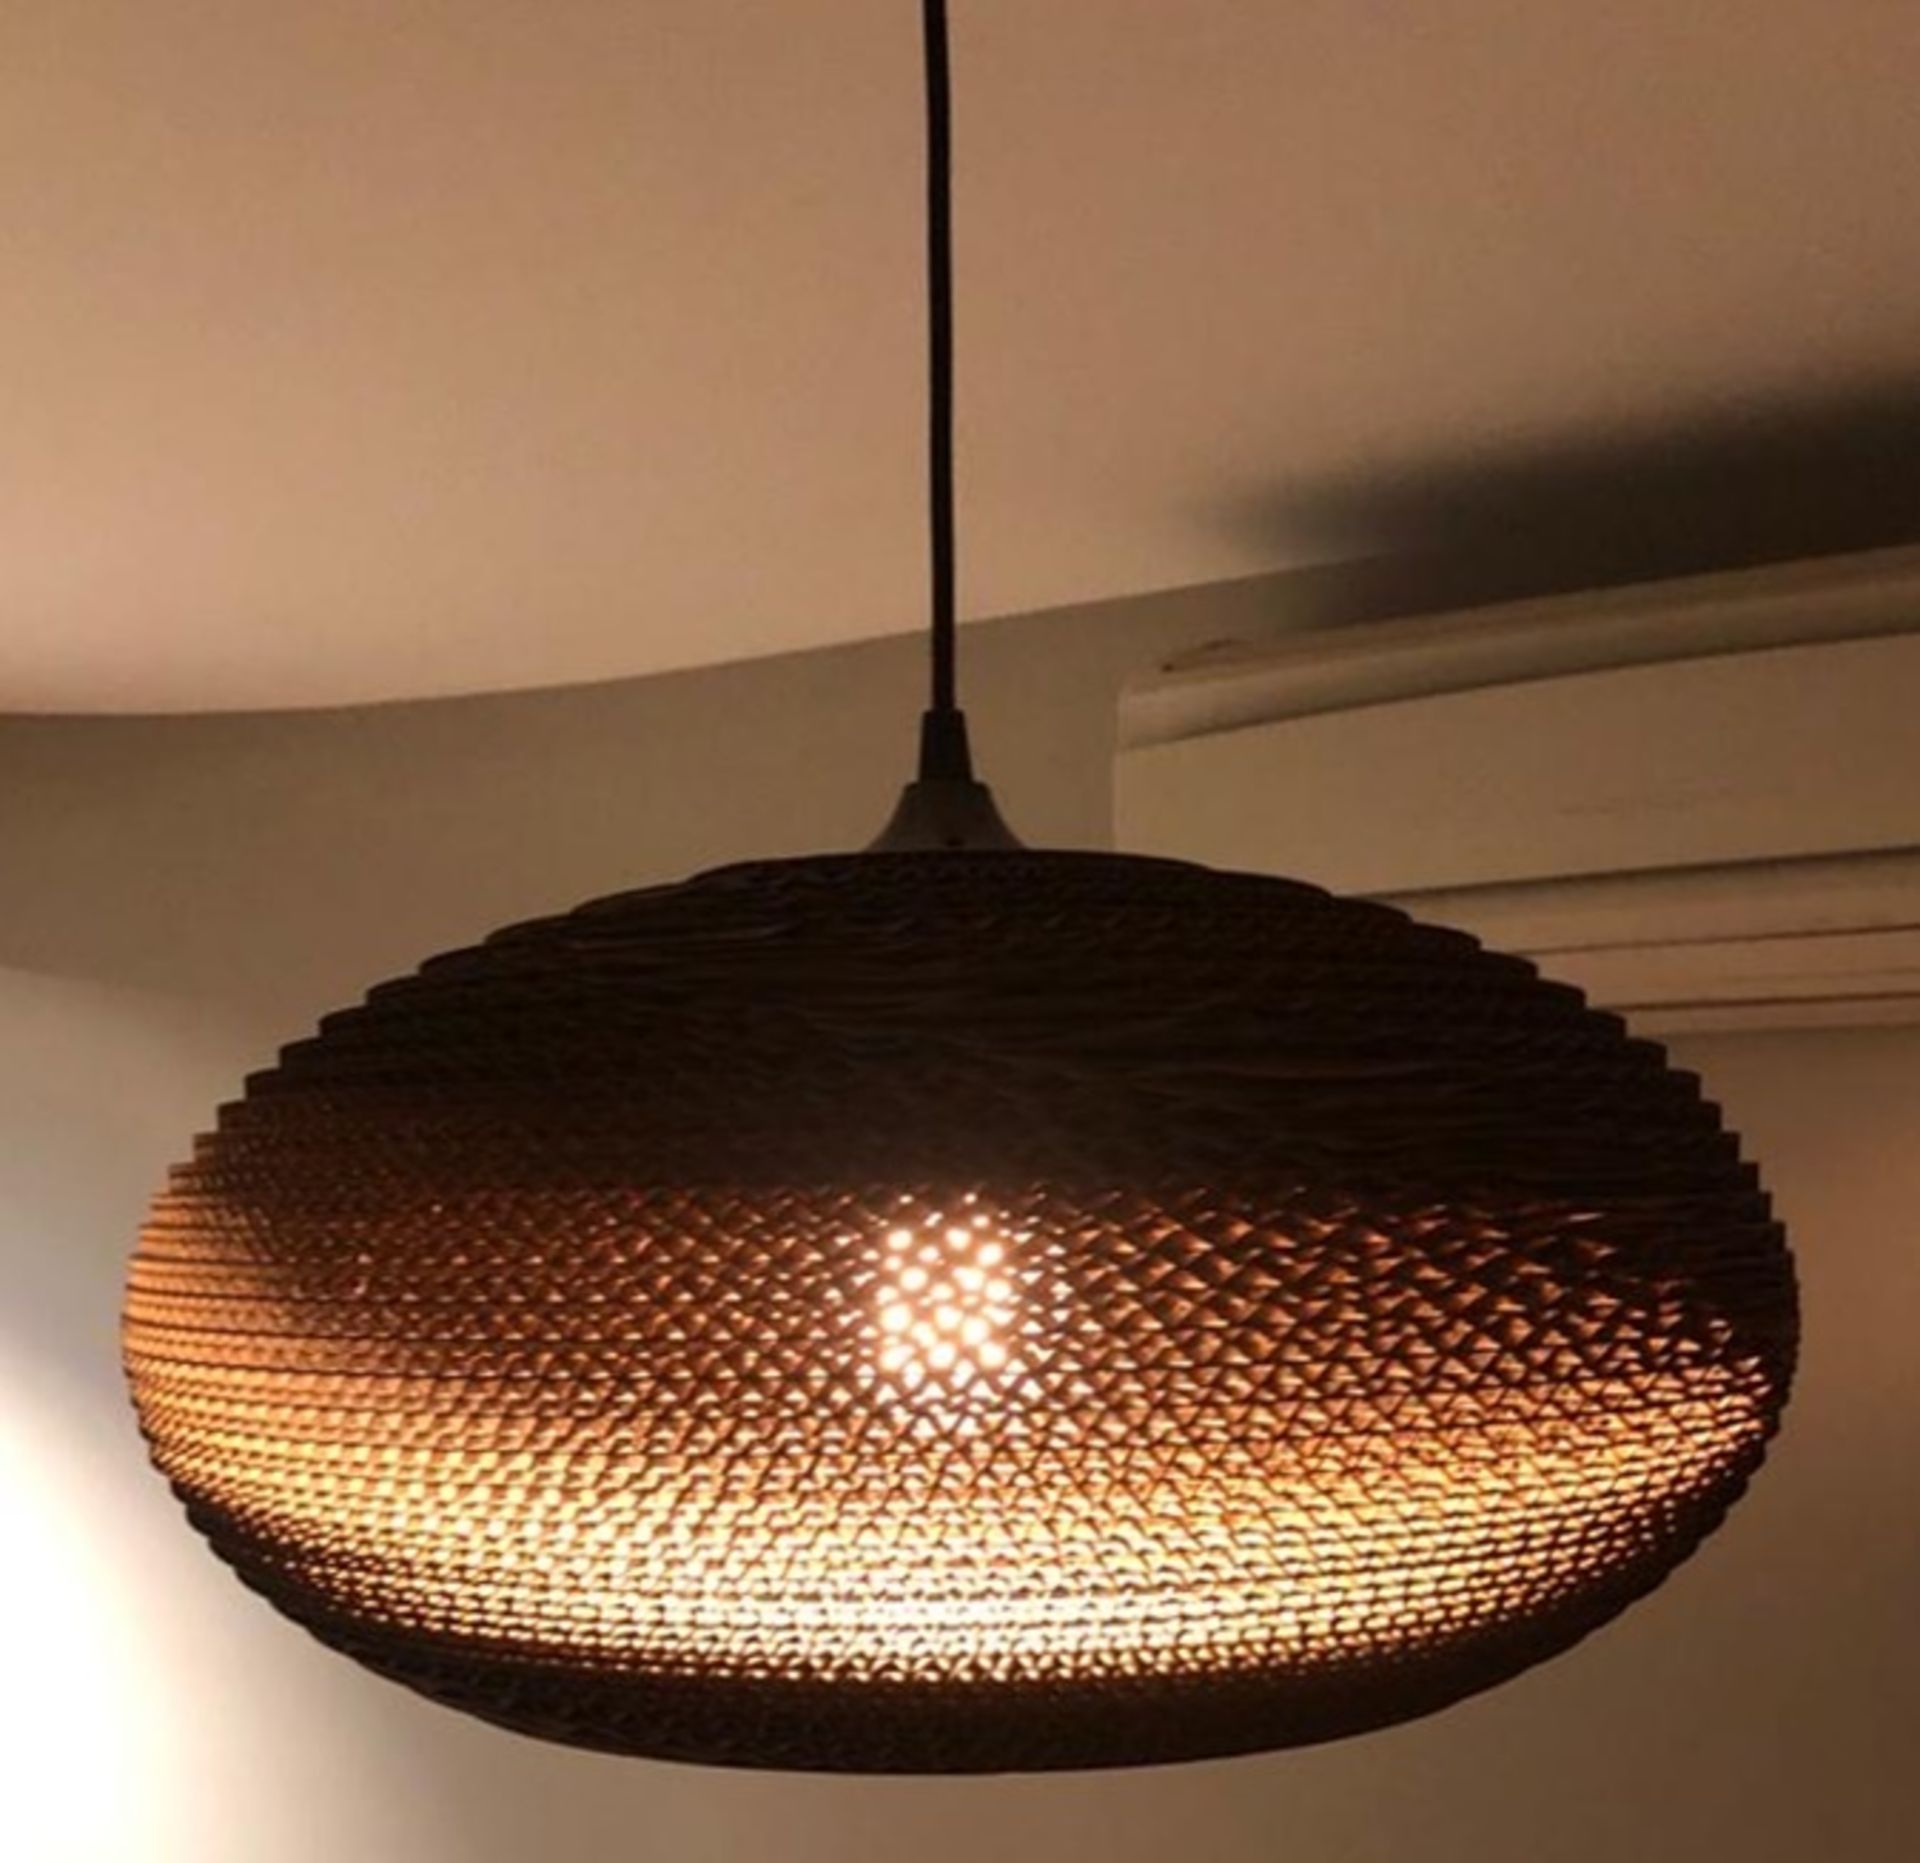 1 x Greypants Scraplight 20 Disc Light Pendant - Handcrafted From Recycled Cardboard - RRP £250 -